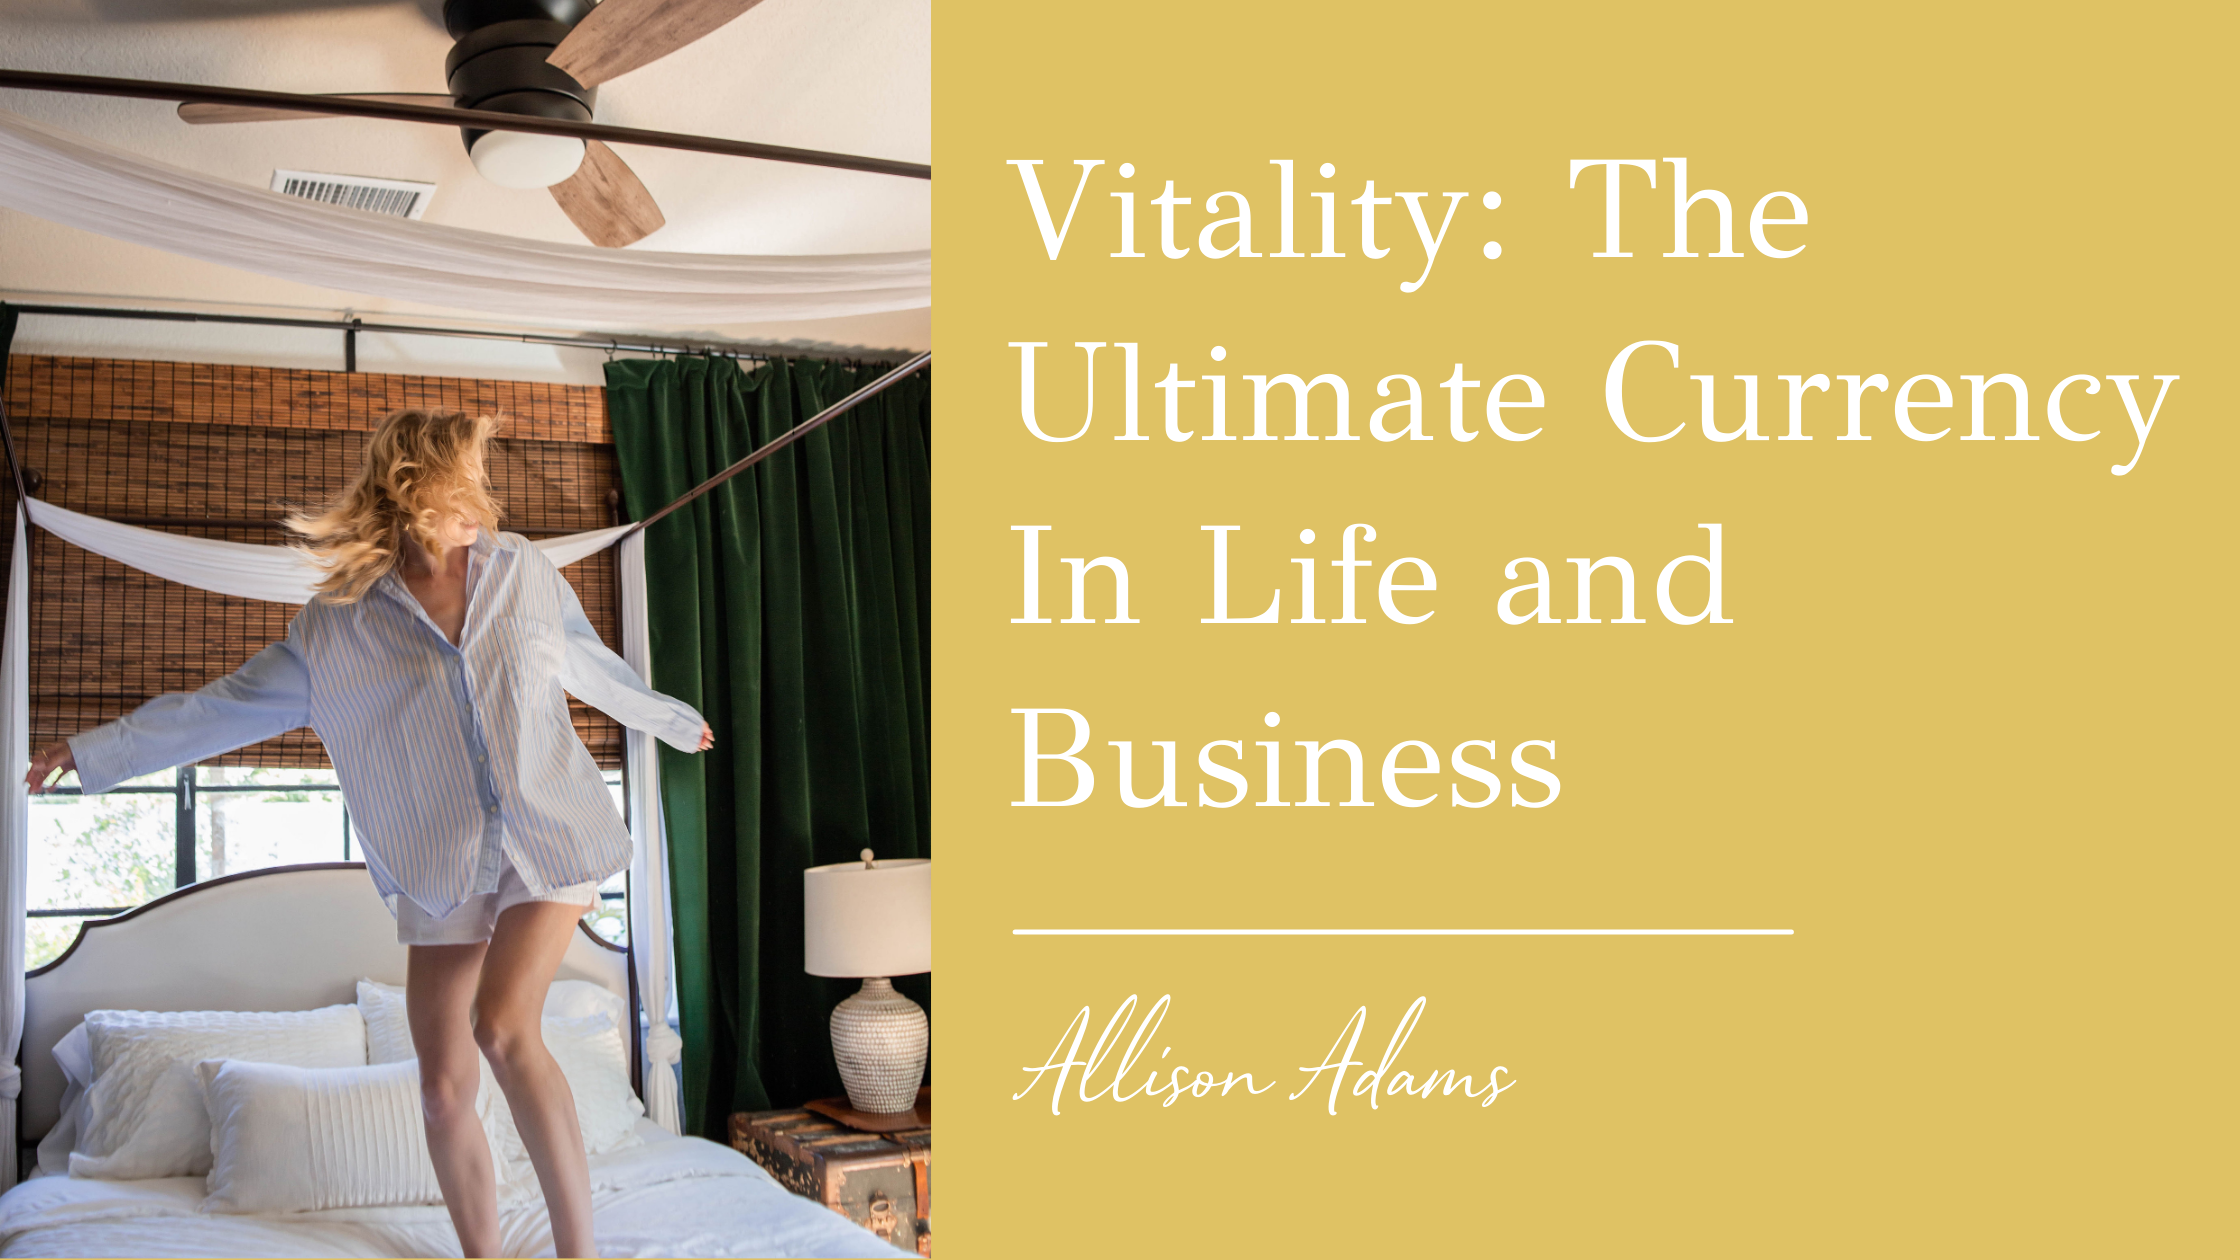 Vitality: The Ultimate Currency In Life and Business